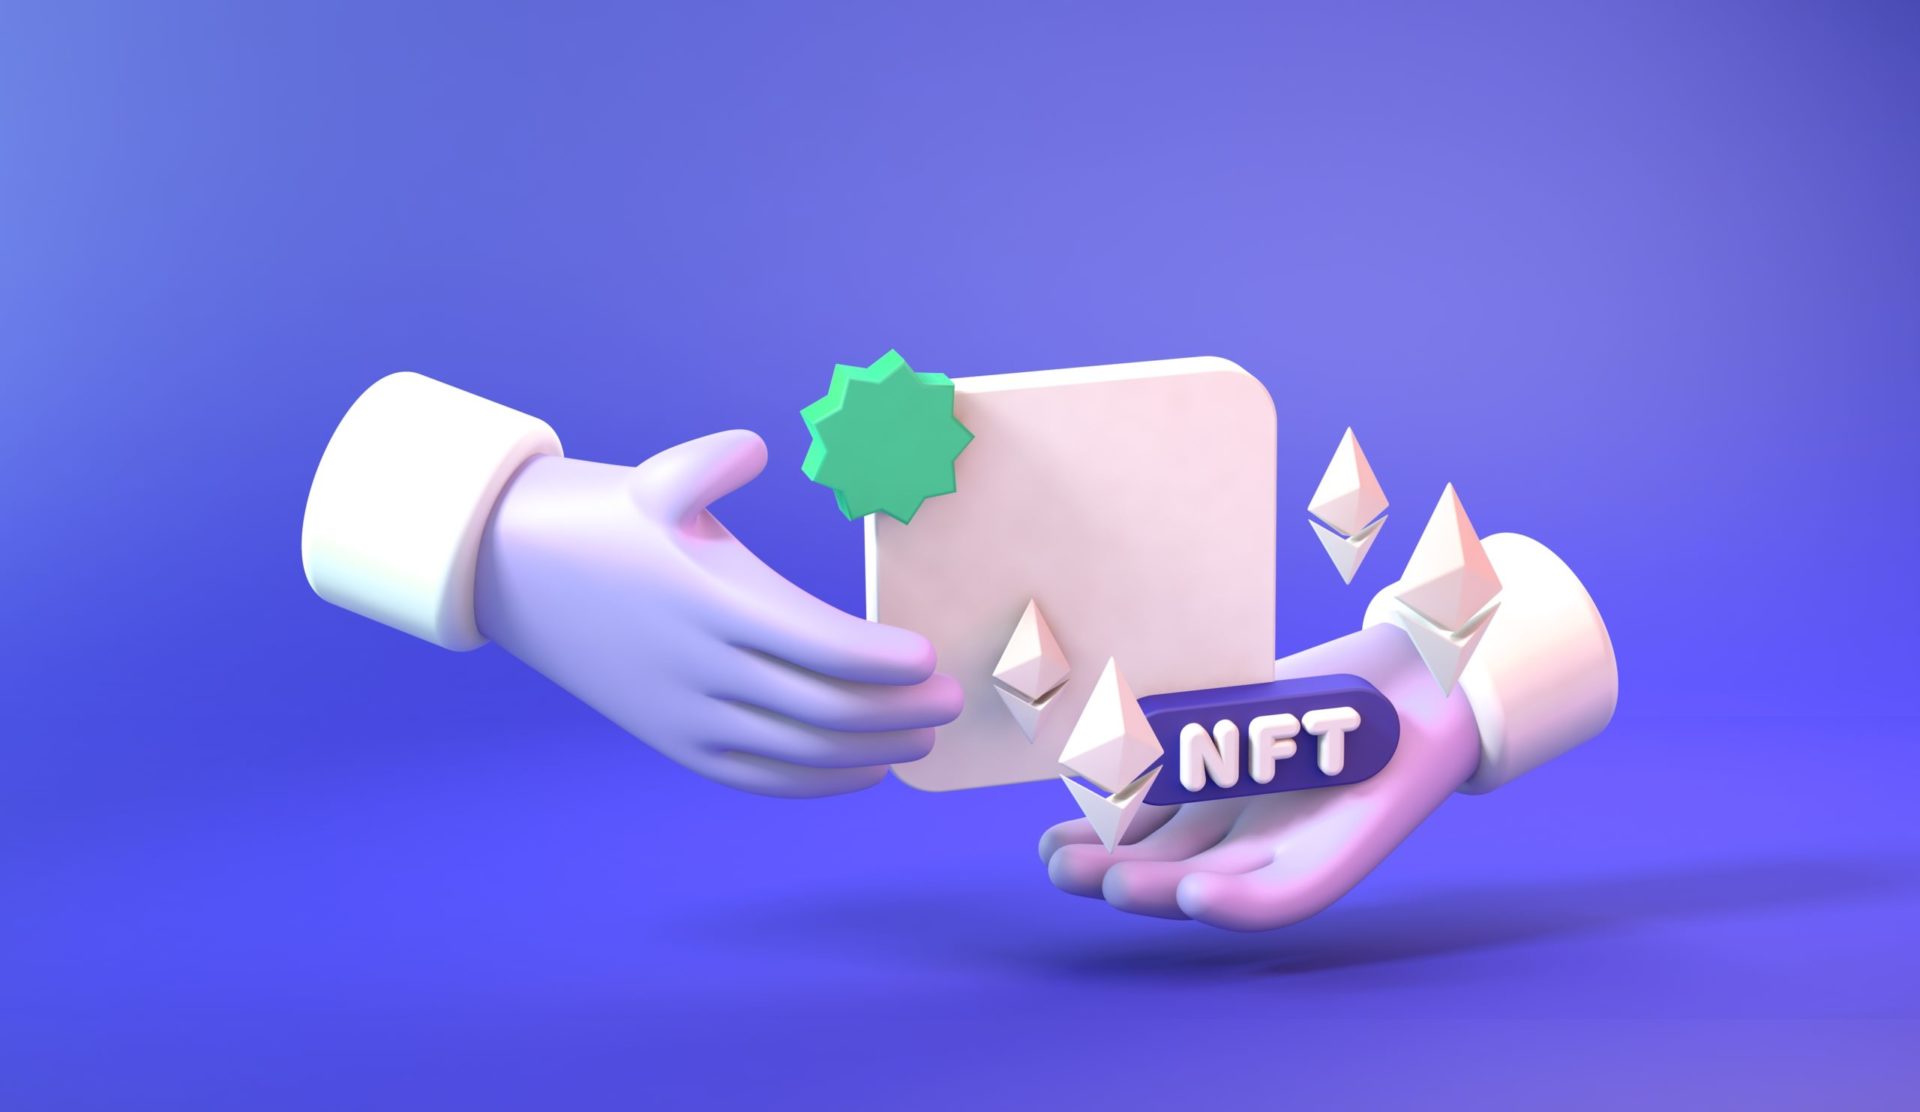 A review of the top 10 NFT marketplaces